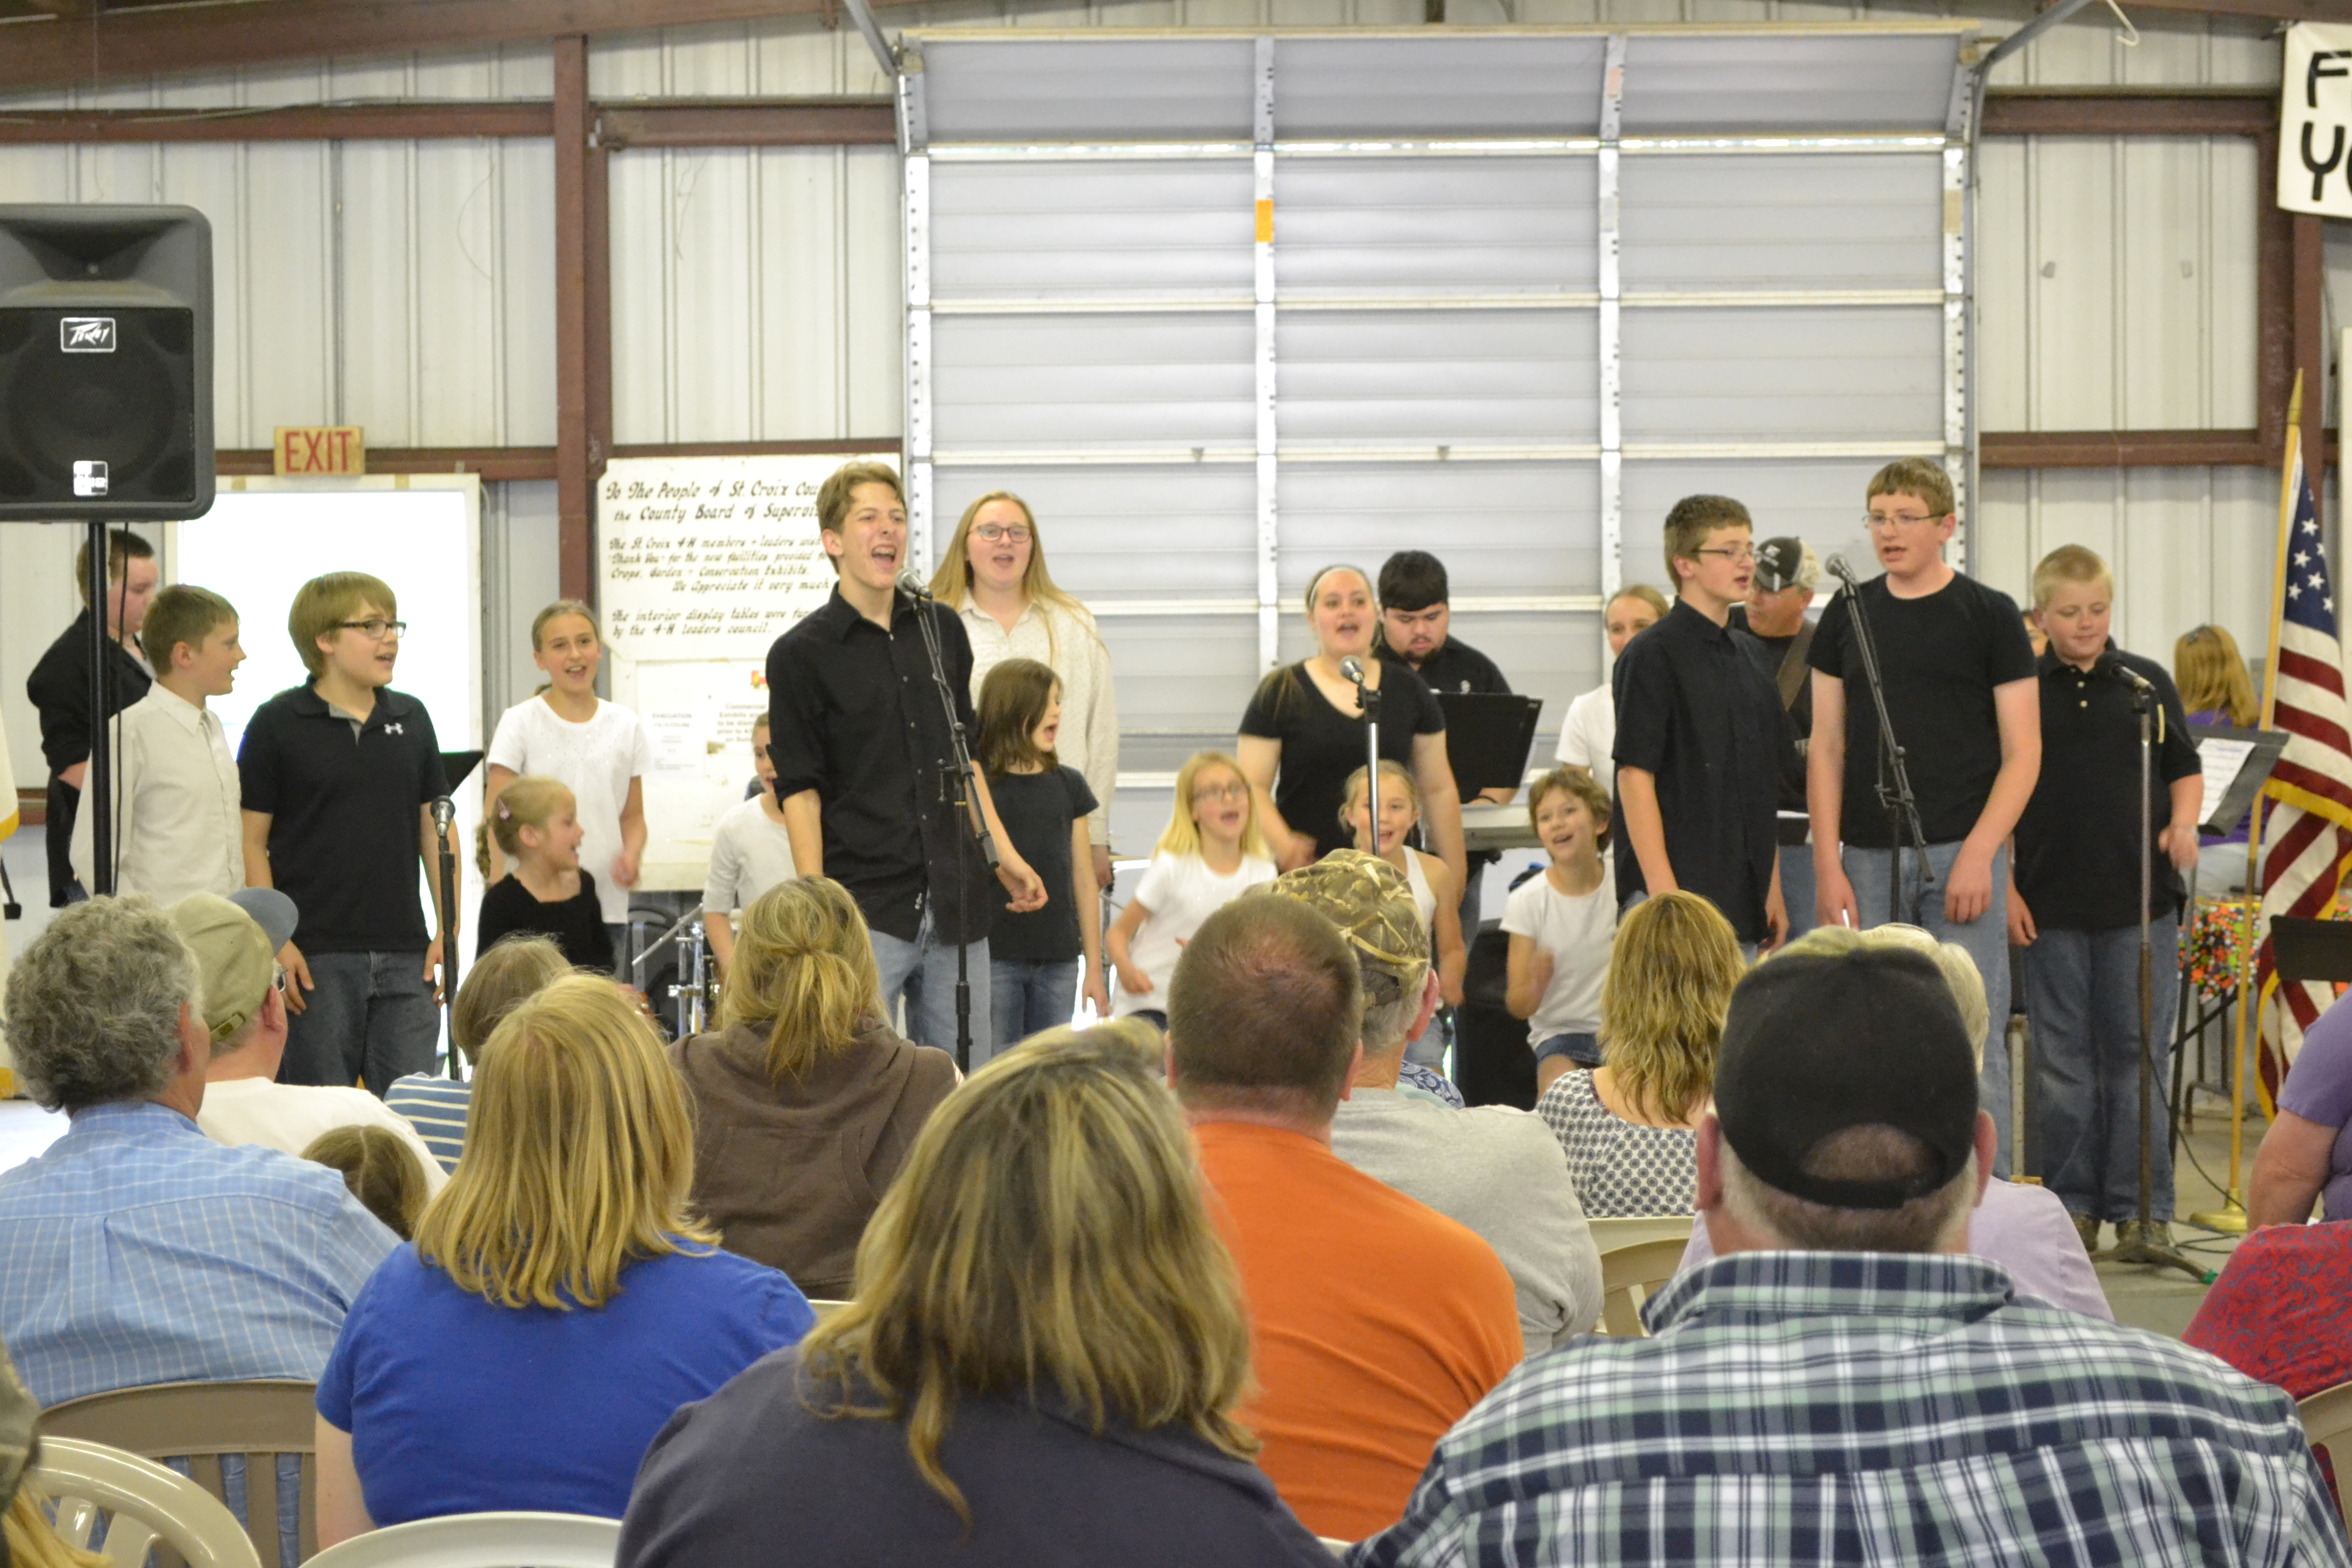 Some of the live entertainment during May Fair by local 4-H'ers.